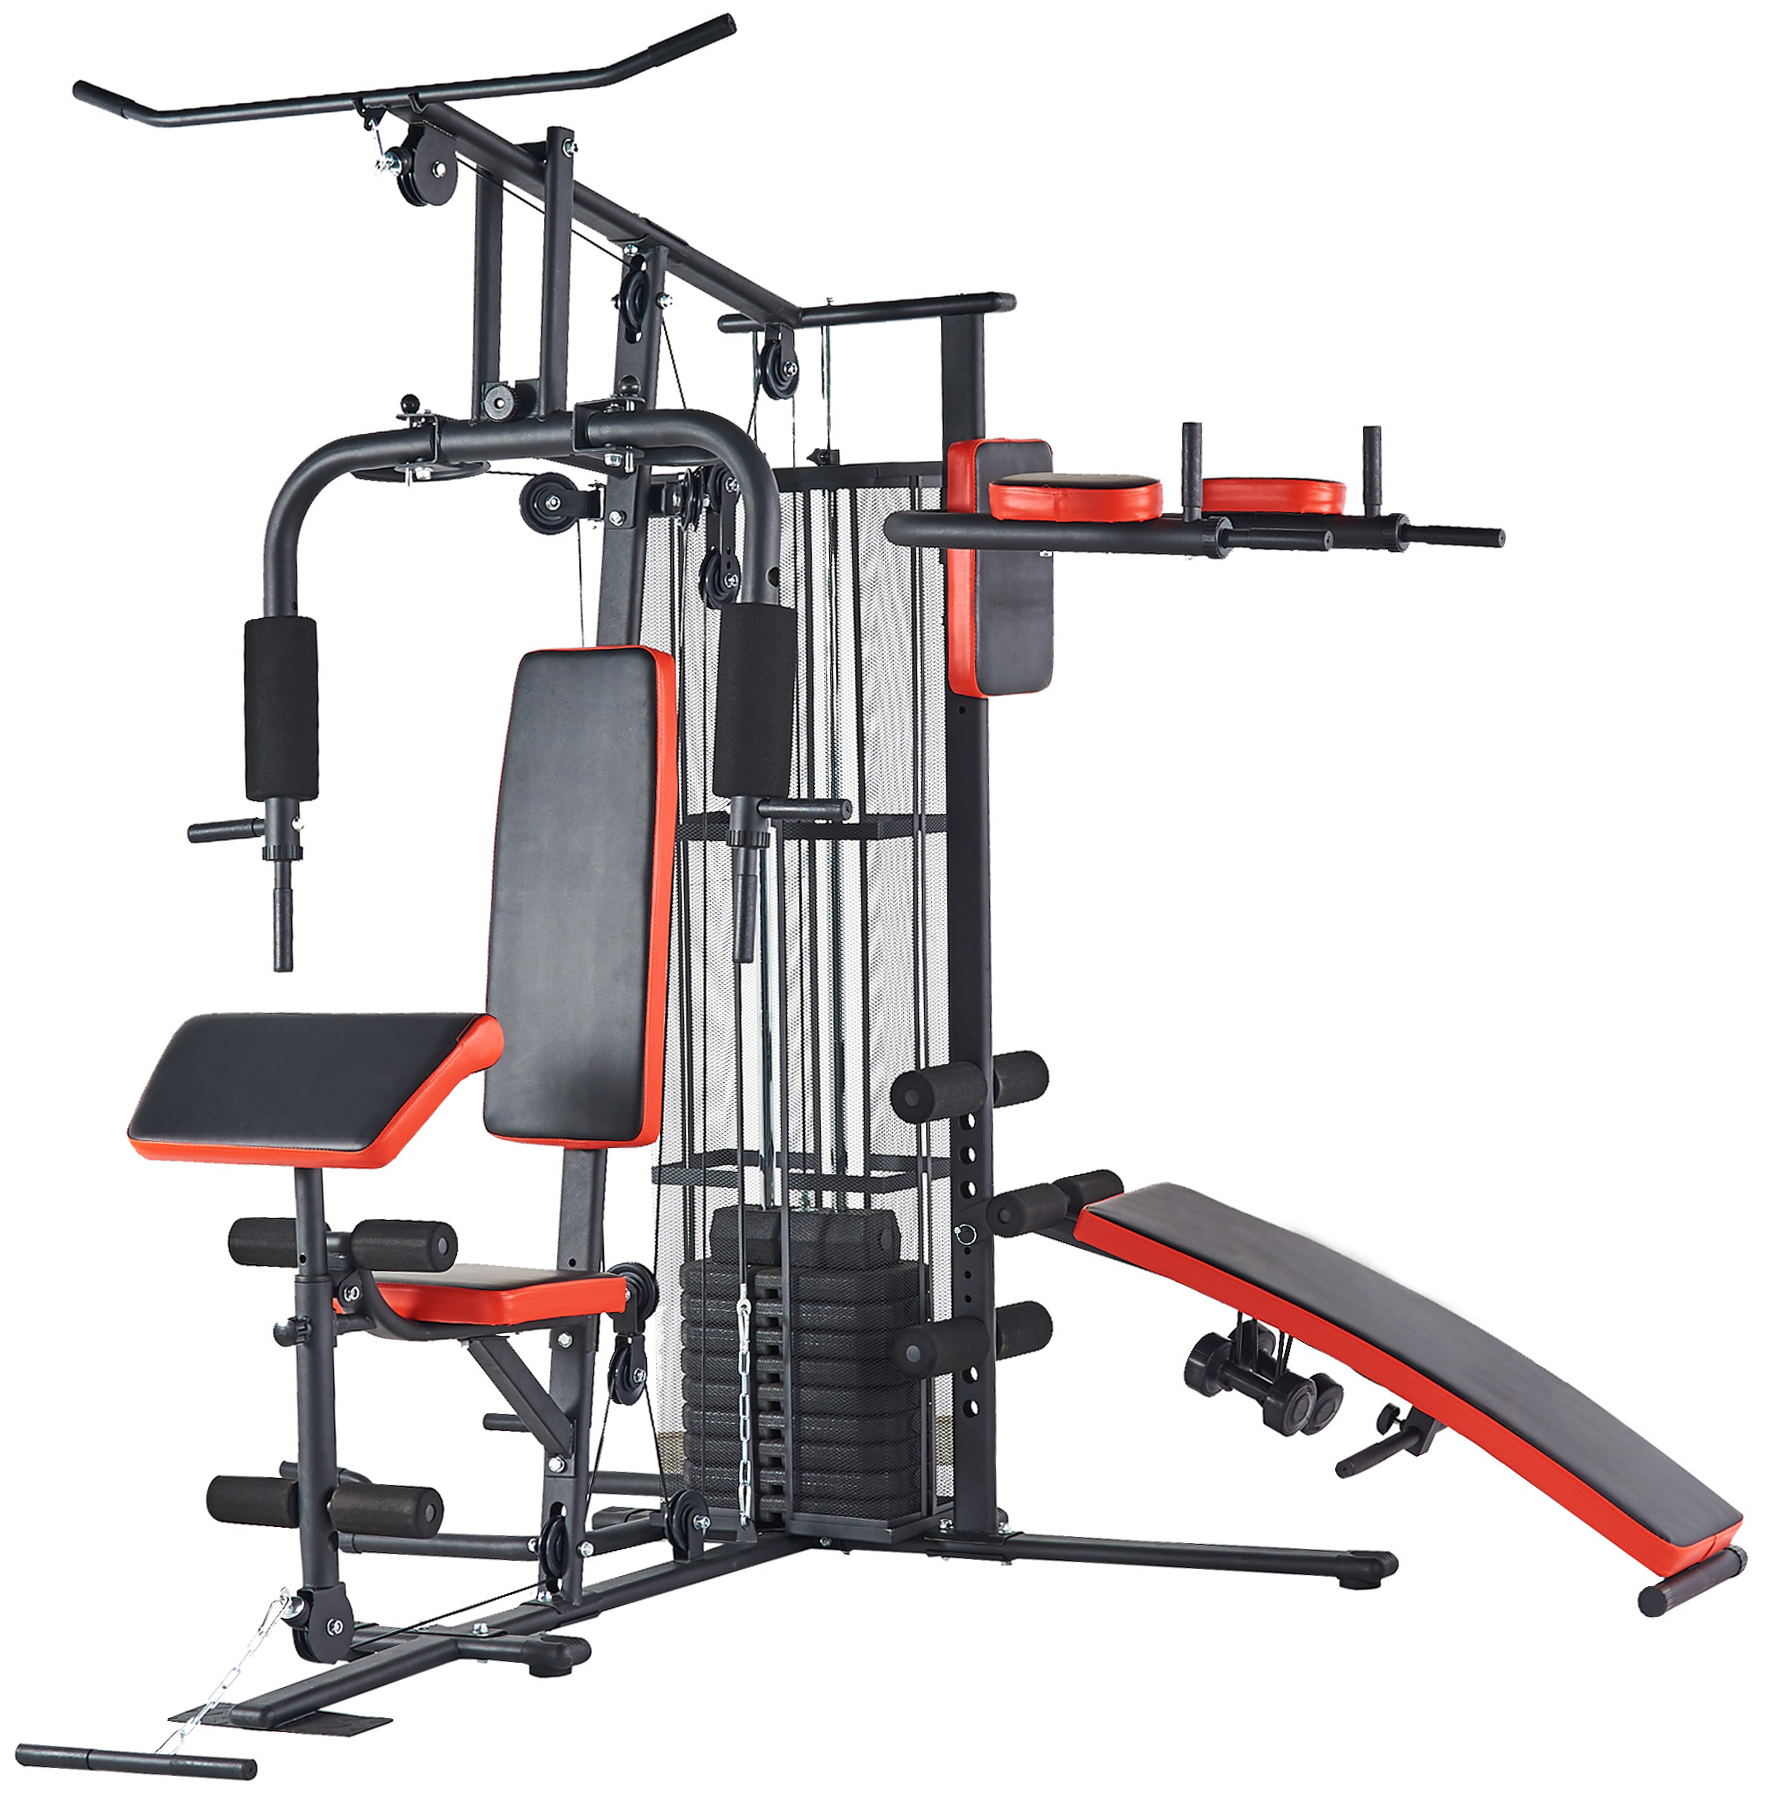 BalanceFrom RS 90XLS Home Gym System Multiple Purpose Workout Station with 380 lbs of Resistance, 145 lbs Weight Stack, Comes with Installation Instruction Video - image 1 of 13